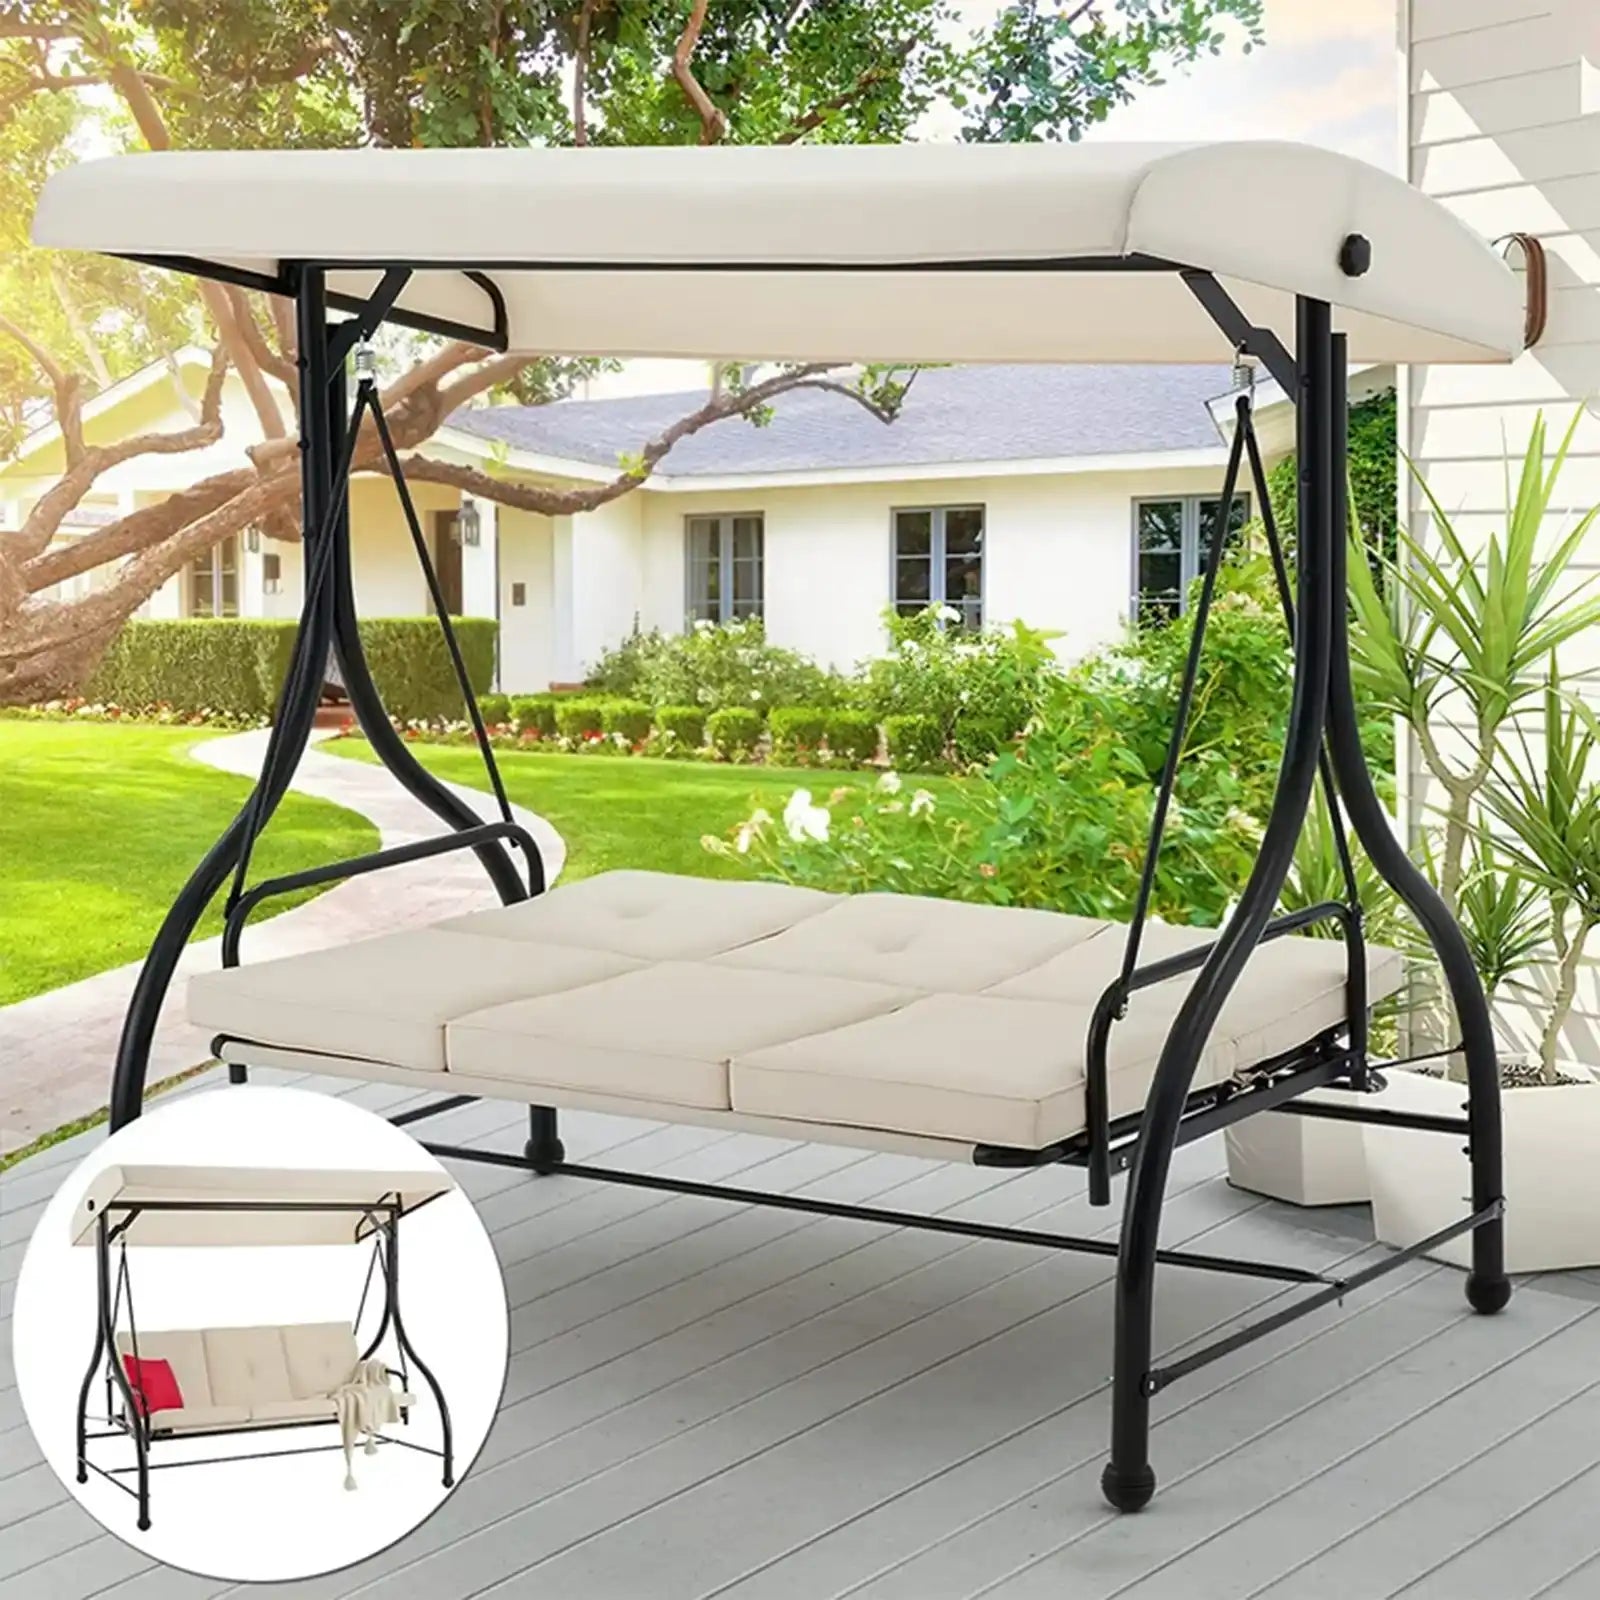 3 Persons Outdoor Patio Swing Chair, Converting Swing Glider Hammock